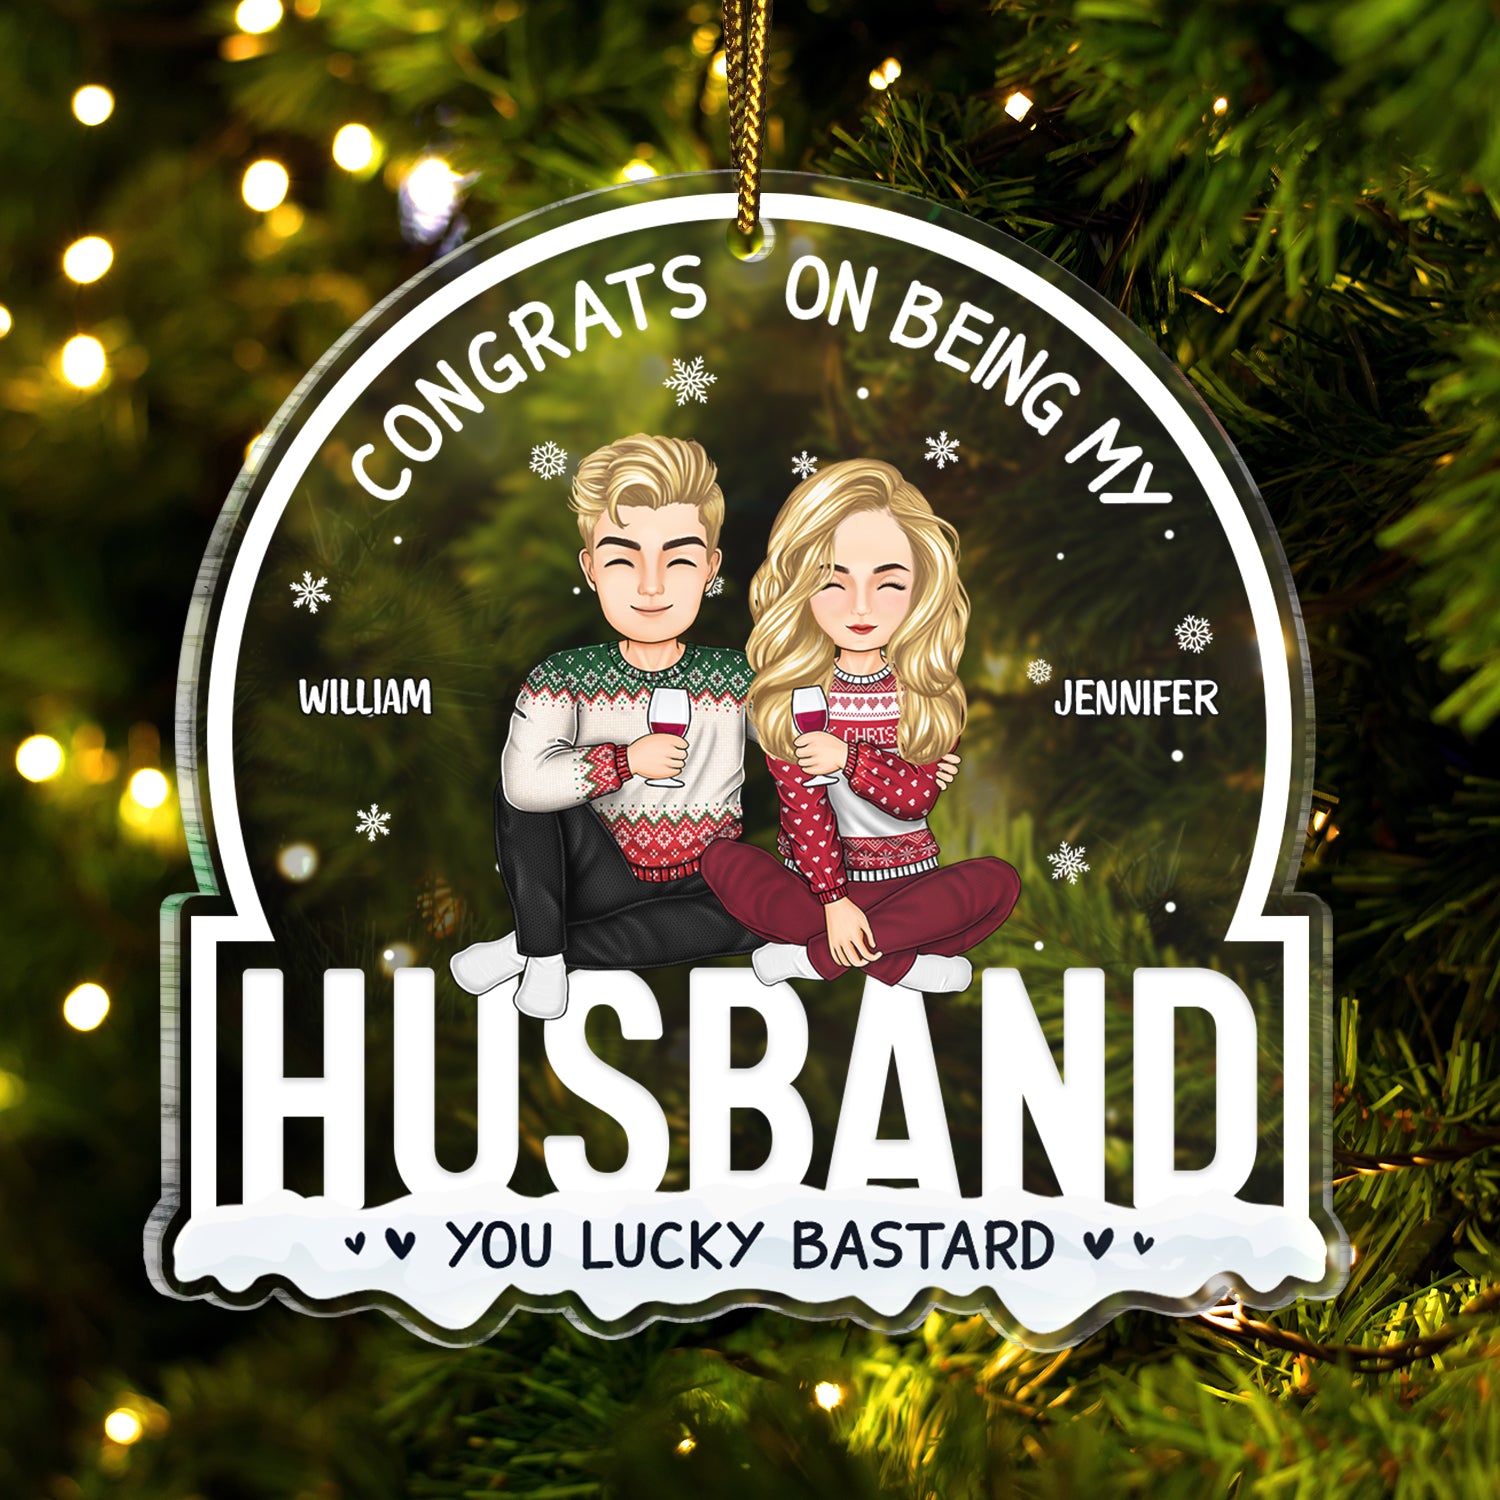 Christmas Couple Congrats On Being My Husband - Gift For Couples - Personalized Custom Shaped Acrylic Ornament